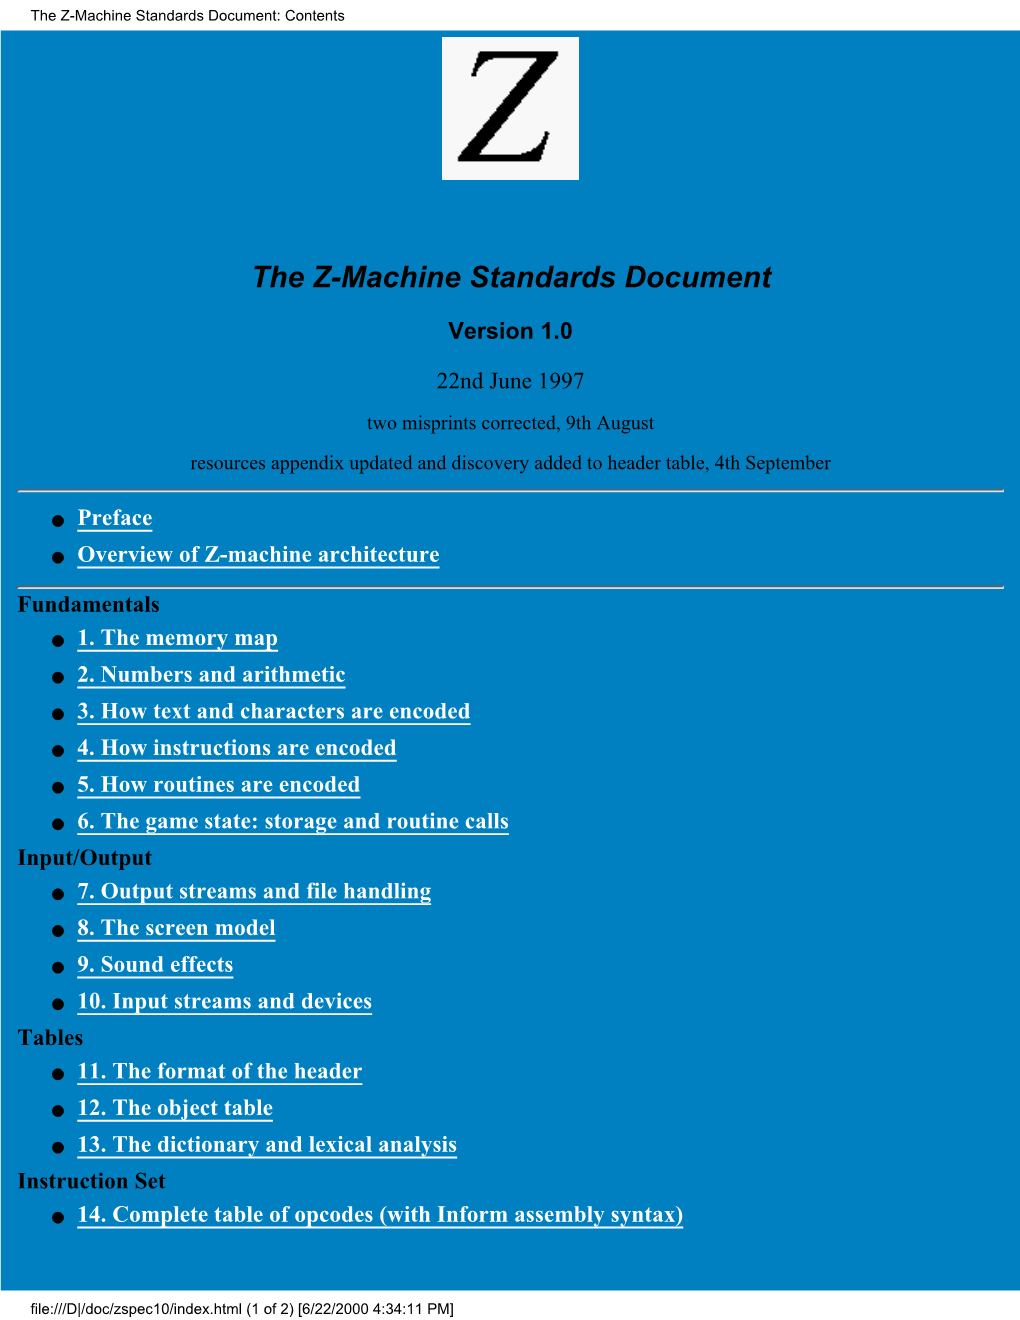 The Z-Machine Standards Document: Contents